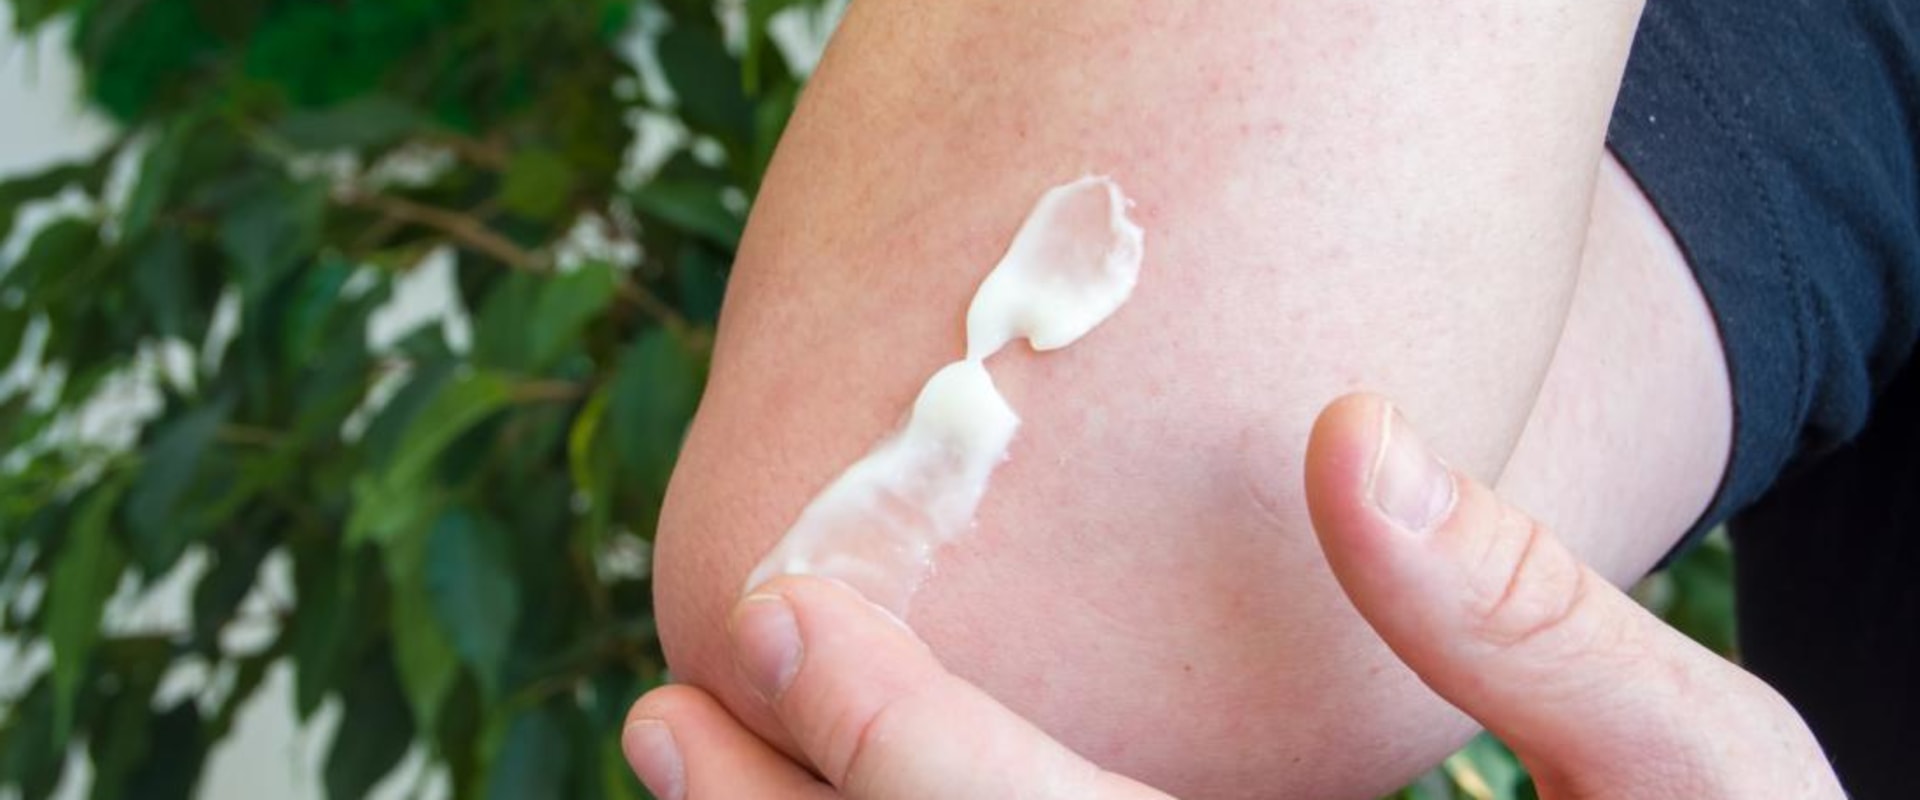 Topical Application: Types, Benefits, and How to Use